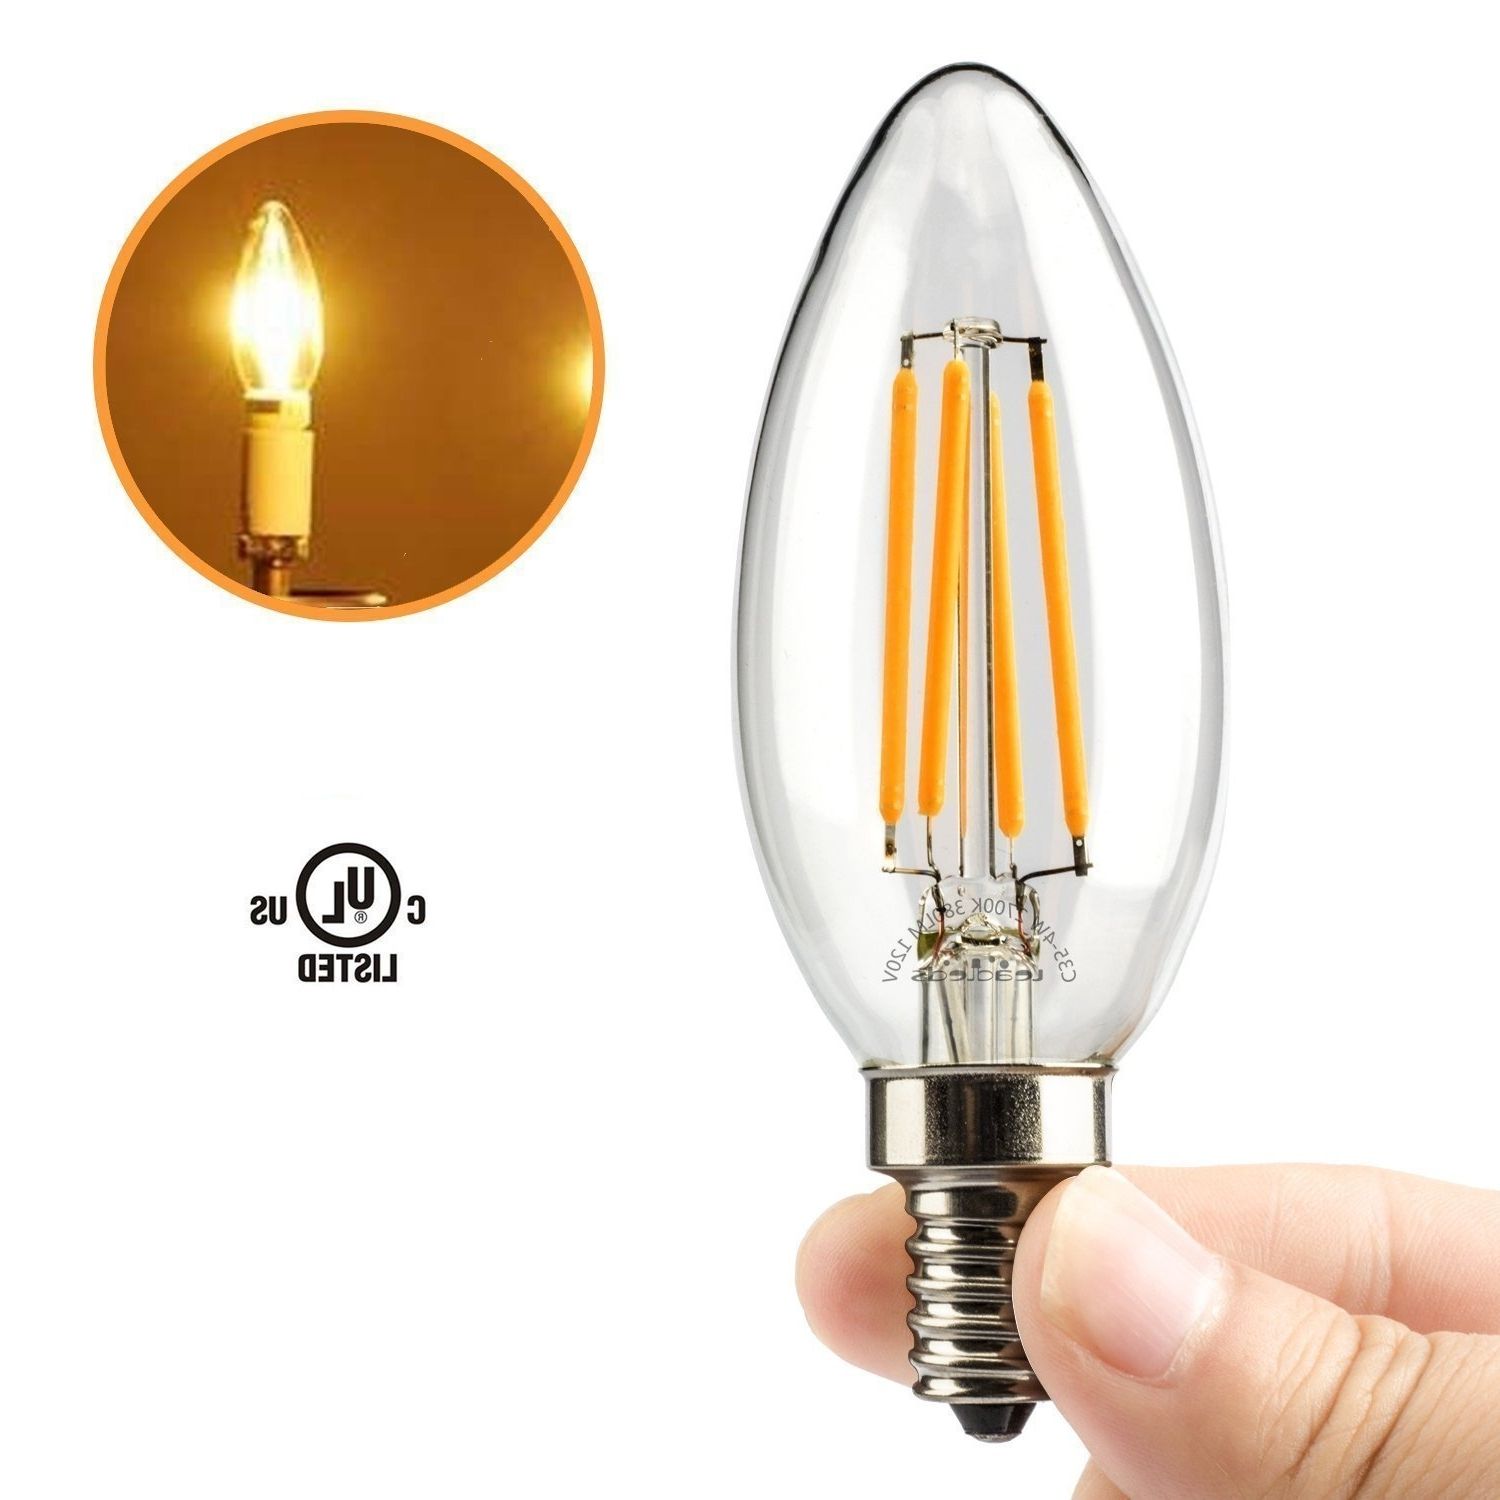 Amazon: Leadleds 4w Candelabra Led Bulb 40 Watt Equivalent 2700k With Regard To 2018 Led Candle Chandeliers (Photo 9 of 15)